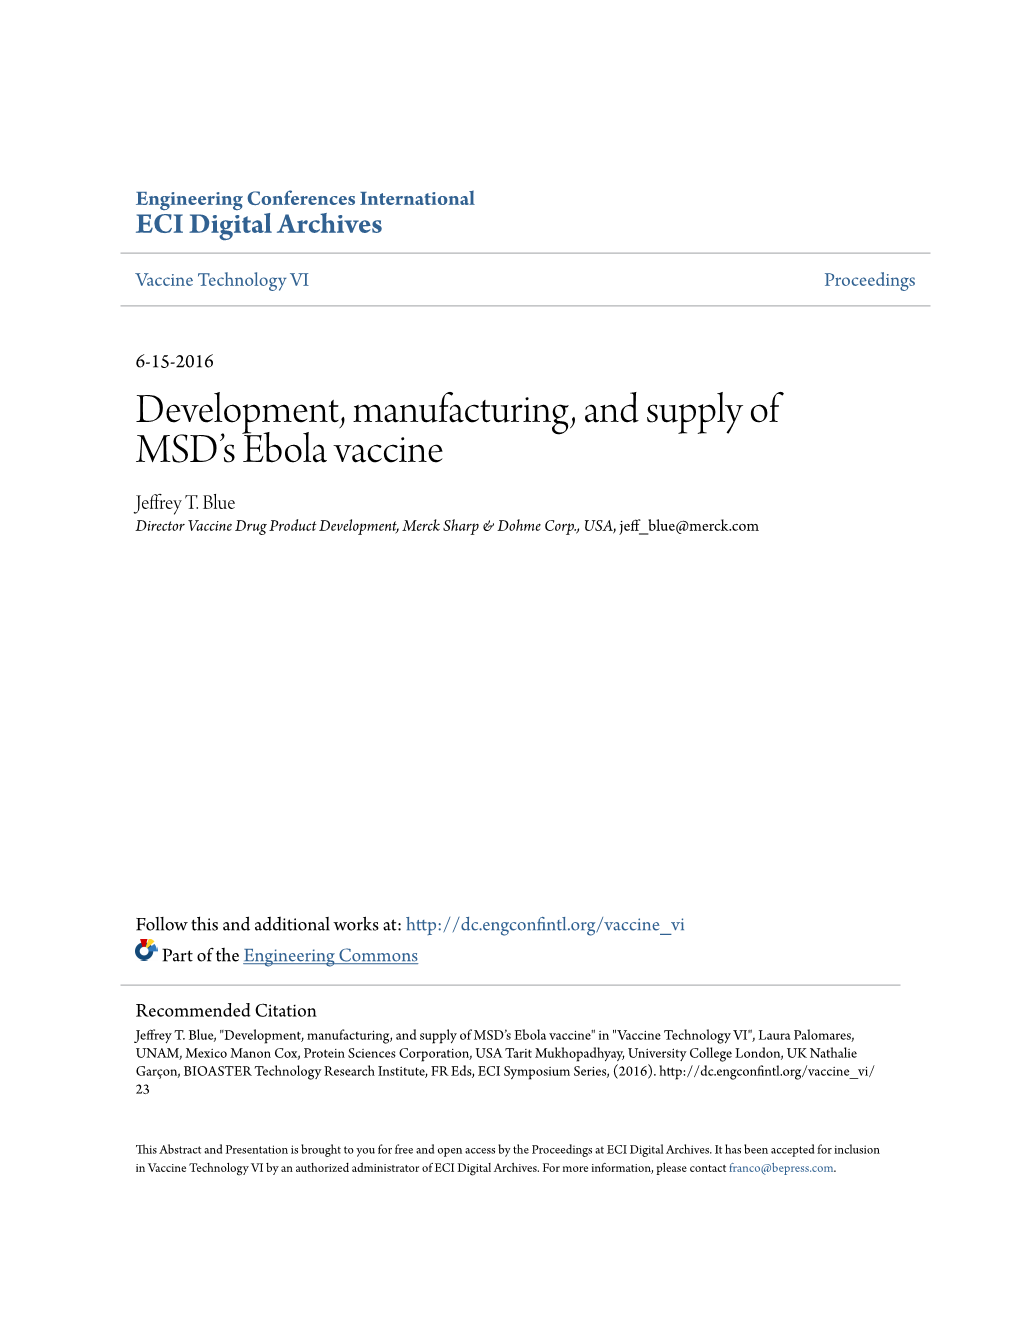 Development, Manufacturing, and Supply of MSD's Ebola Vaccine